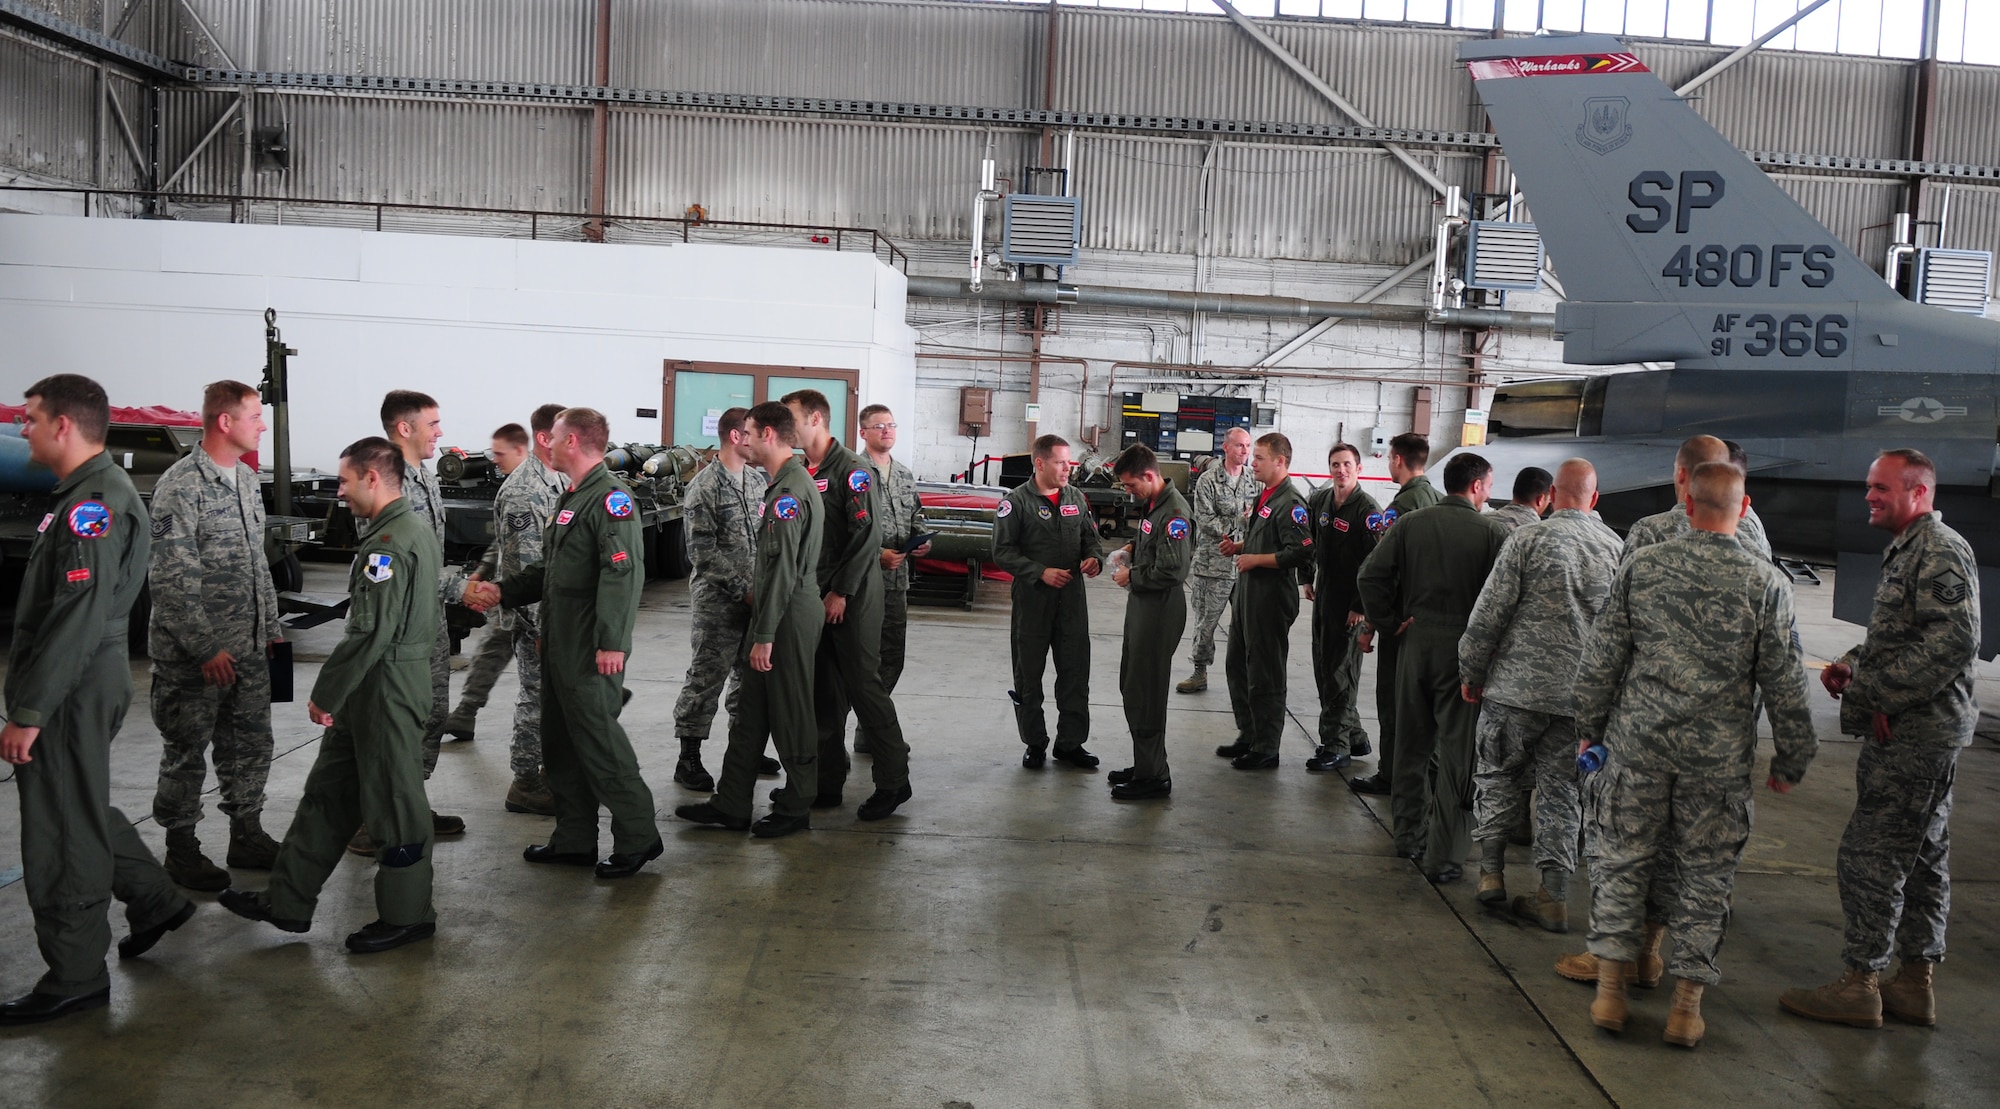 SPANGDAHLEM AIR BASE, Germany – Pilots, spectators and all in attendance at the Dedicated Crew Chief Ceremony form a line congratulating the twenty-nine F-16 Fighting Falcon crew chiefs on their assignments to specific aircraft in the 480th Fighter Squadron fleet Aug 13. This ceremony followed the activation of the 480th Fighter Squadron here earlier that day. (U.S. Air Force Photo by/Staff Sgt. Heather M. Norris)